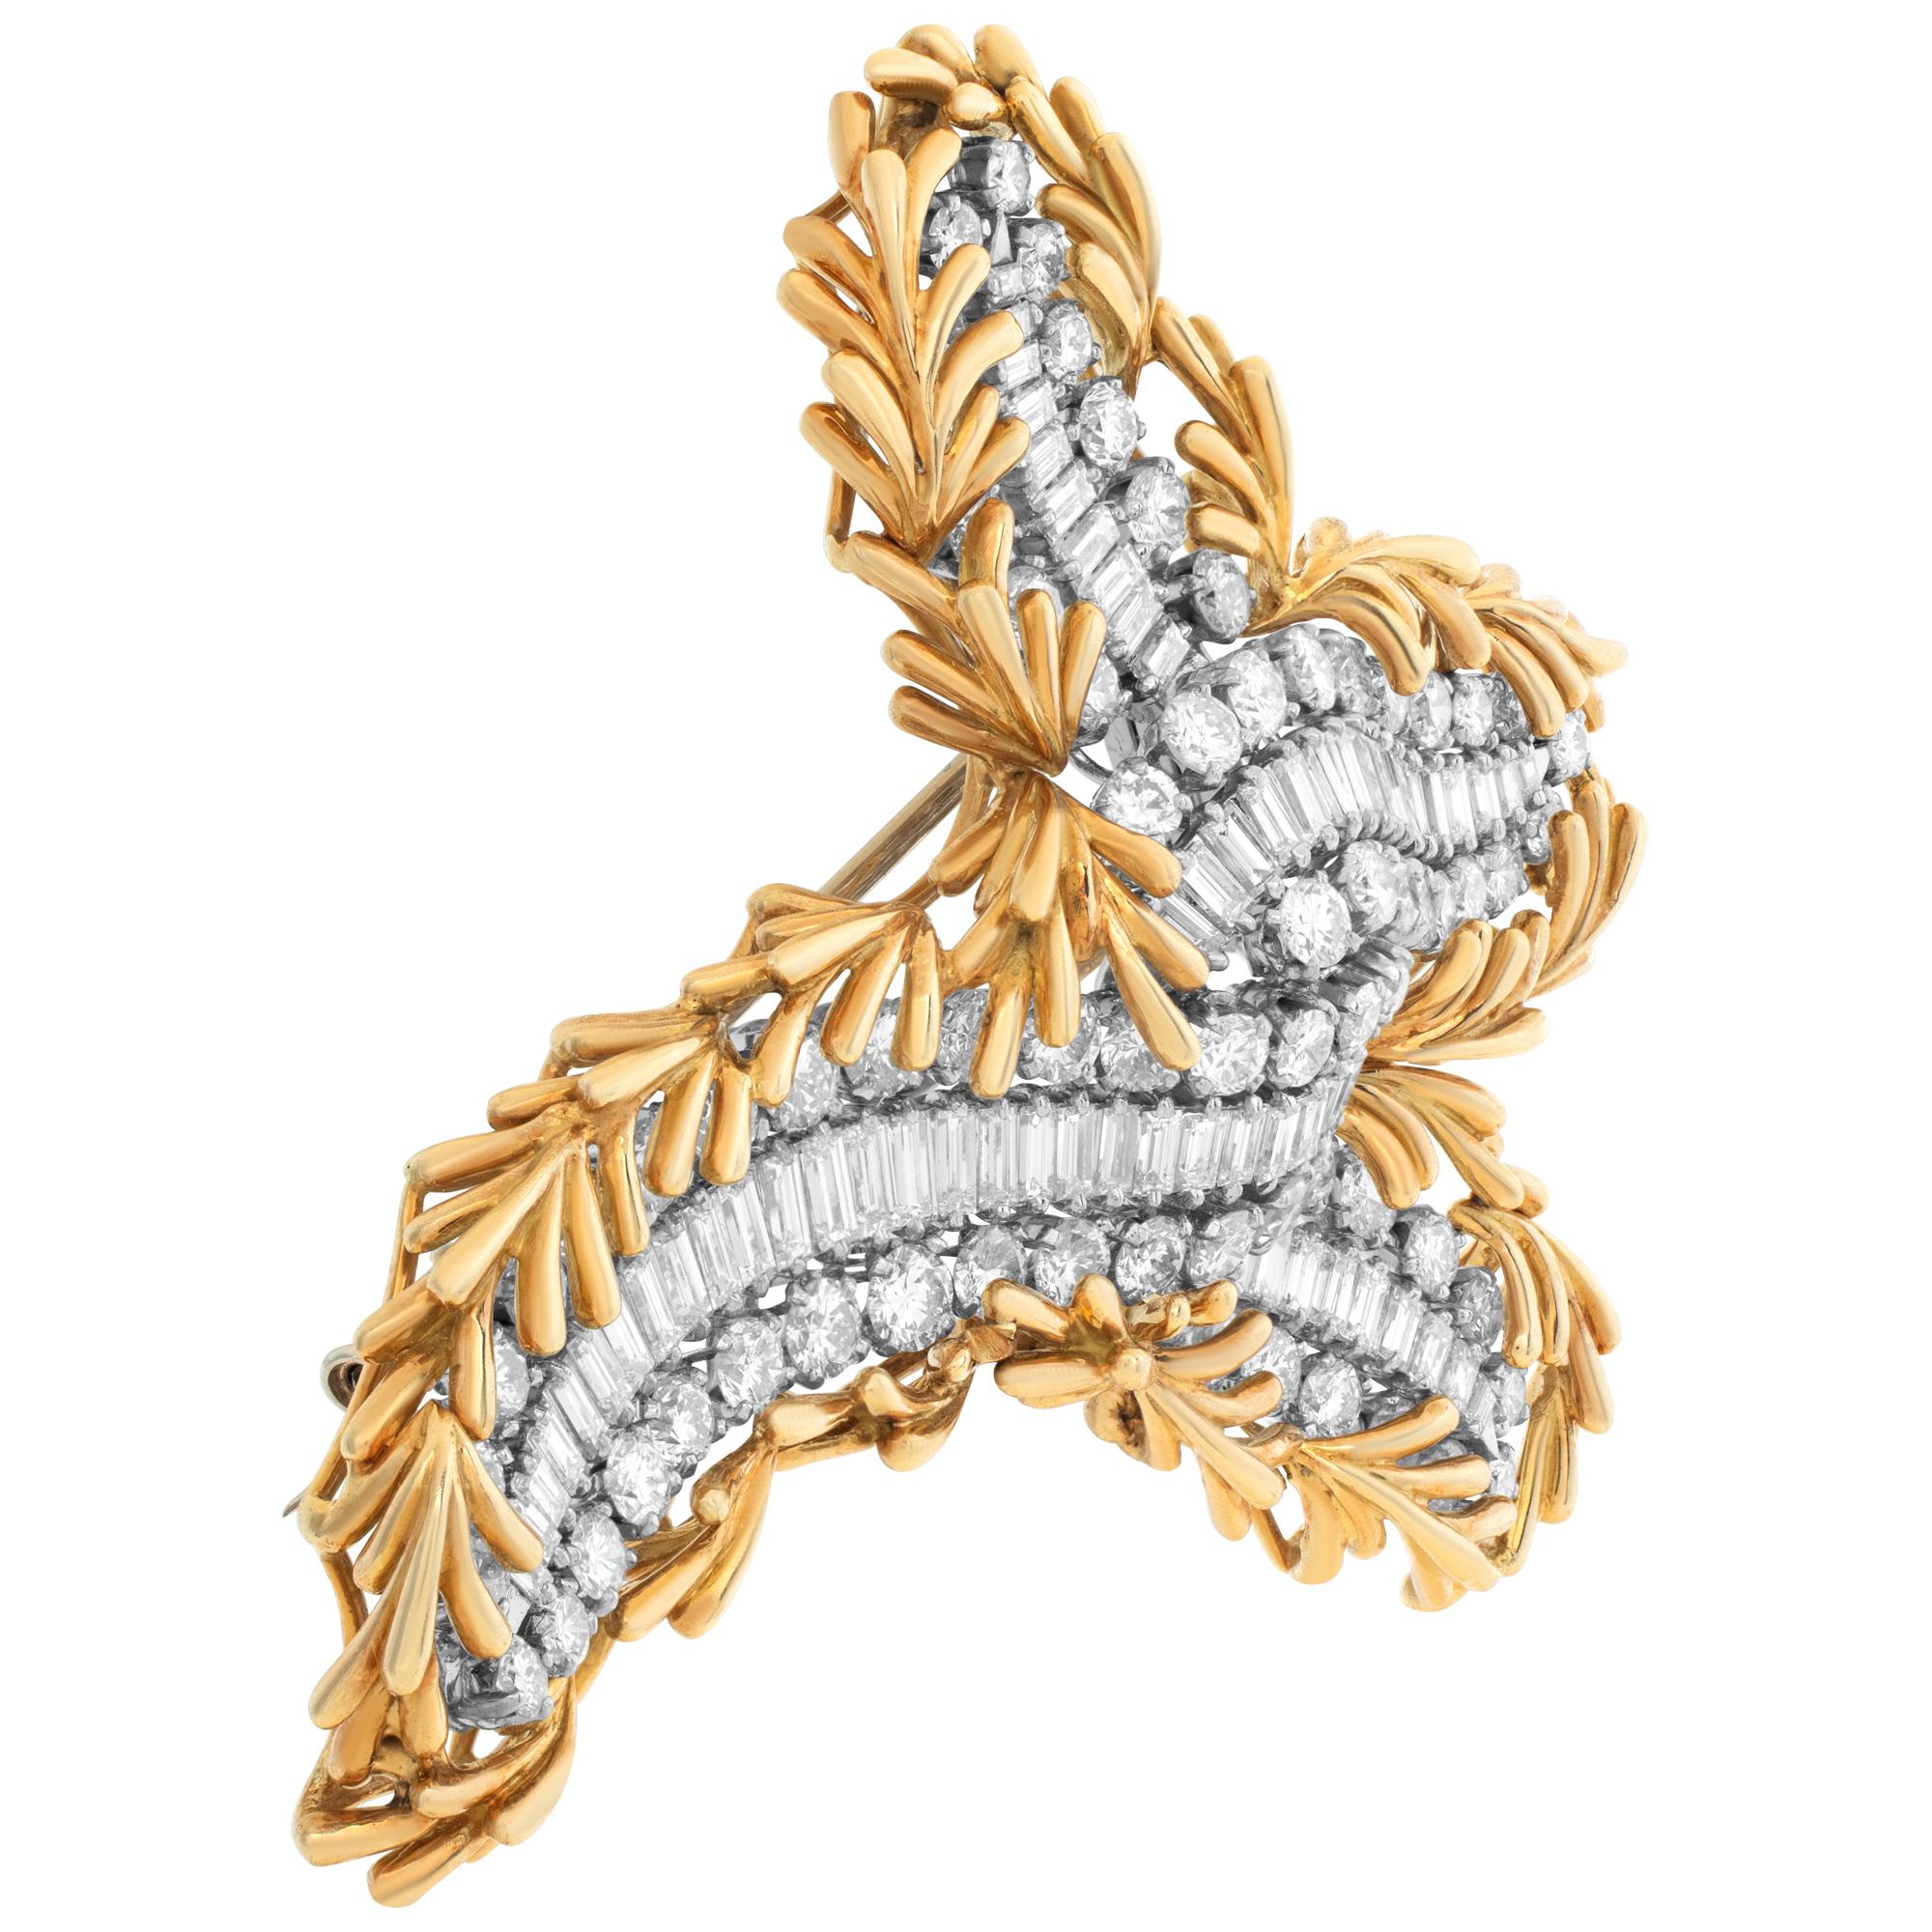 French, mid 20th century diamonds, platinum & 18K yellow gold brooch by Pierre Sterle Paris (1905-1978). This brooch is made in a dimensional stylized bow motif with a decorated edge of 18K gold twiggs. Center baguettes & brilliant round cut